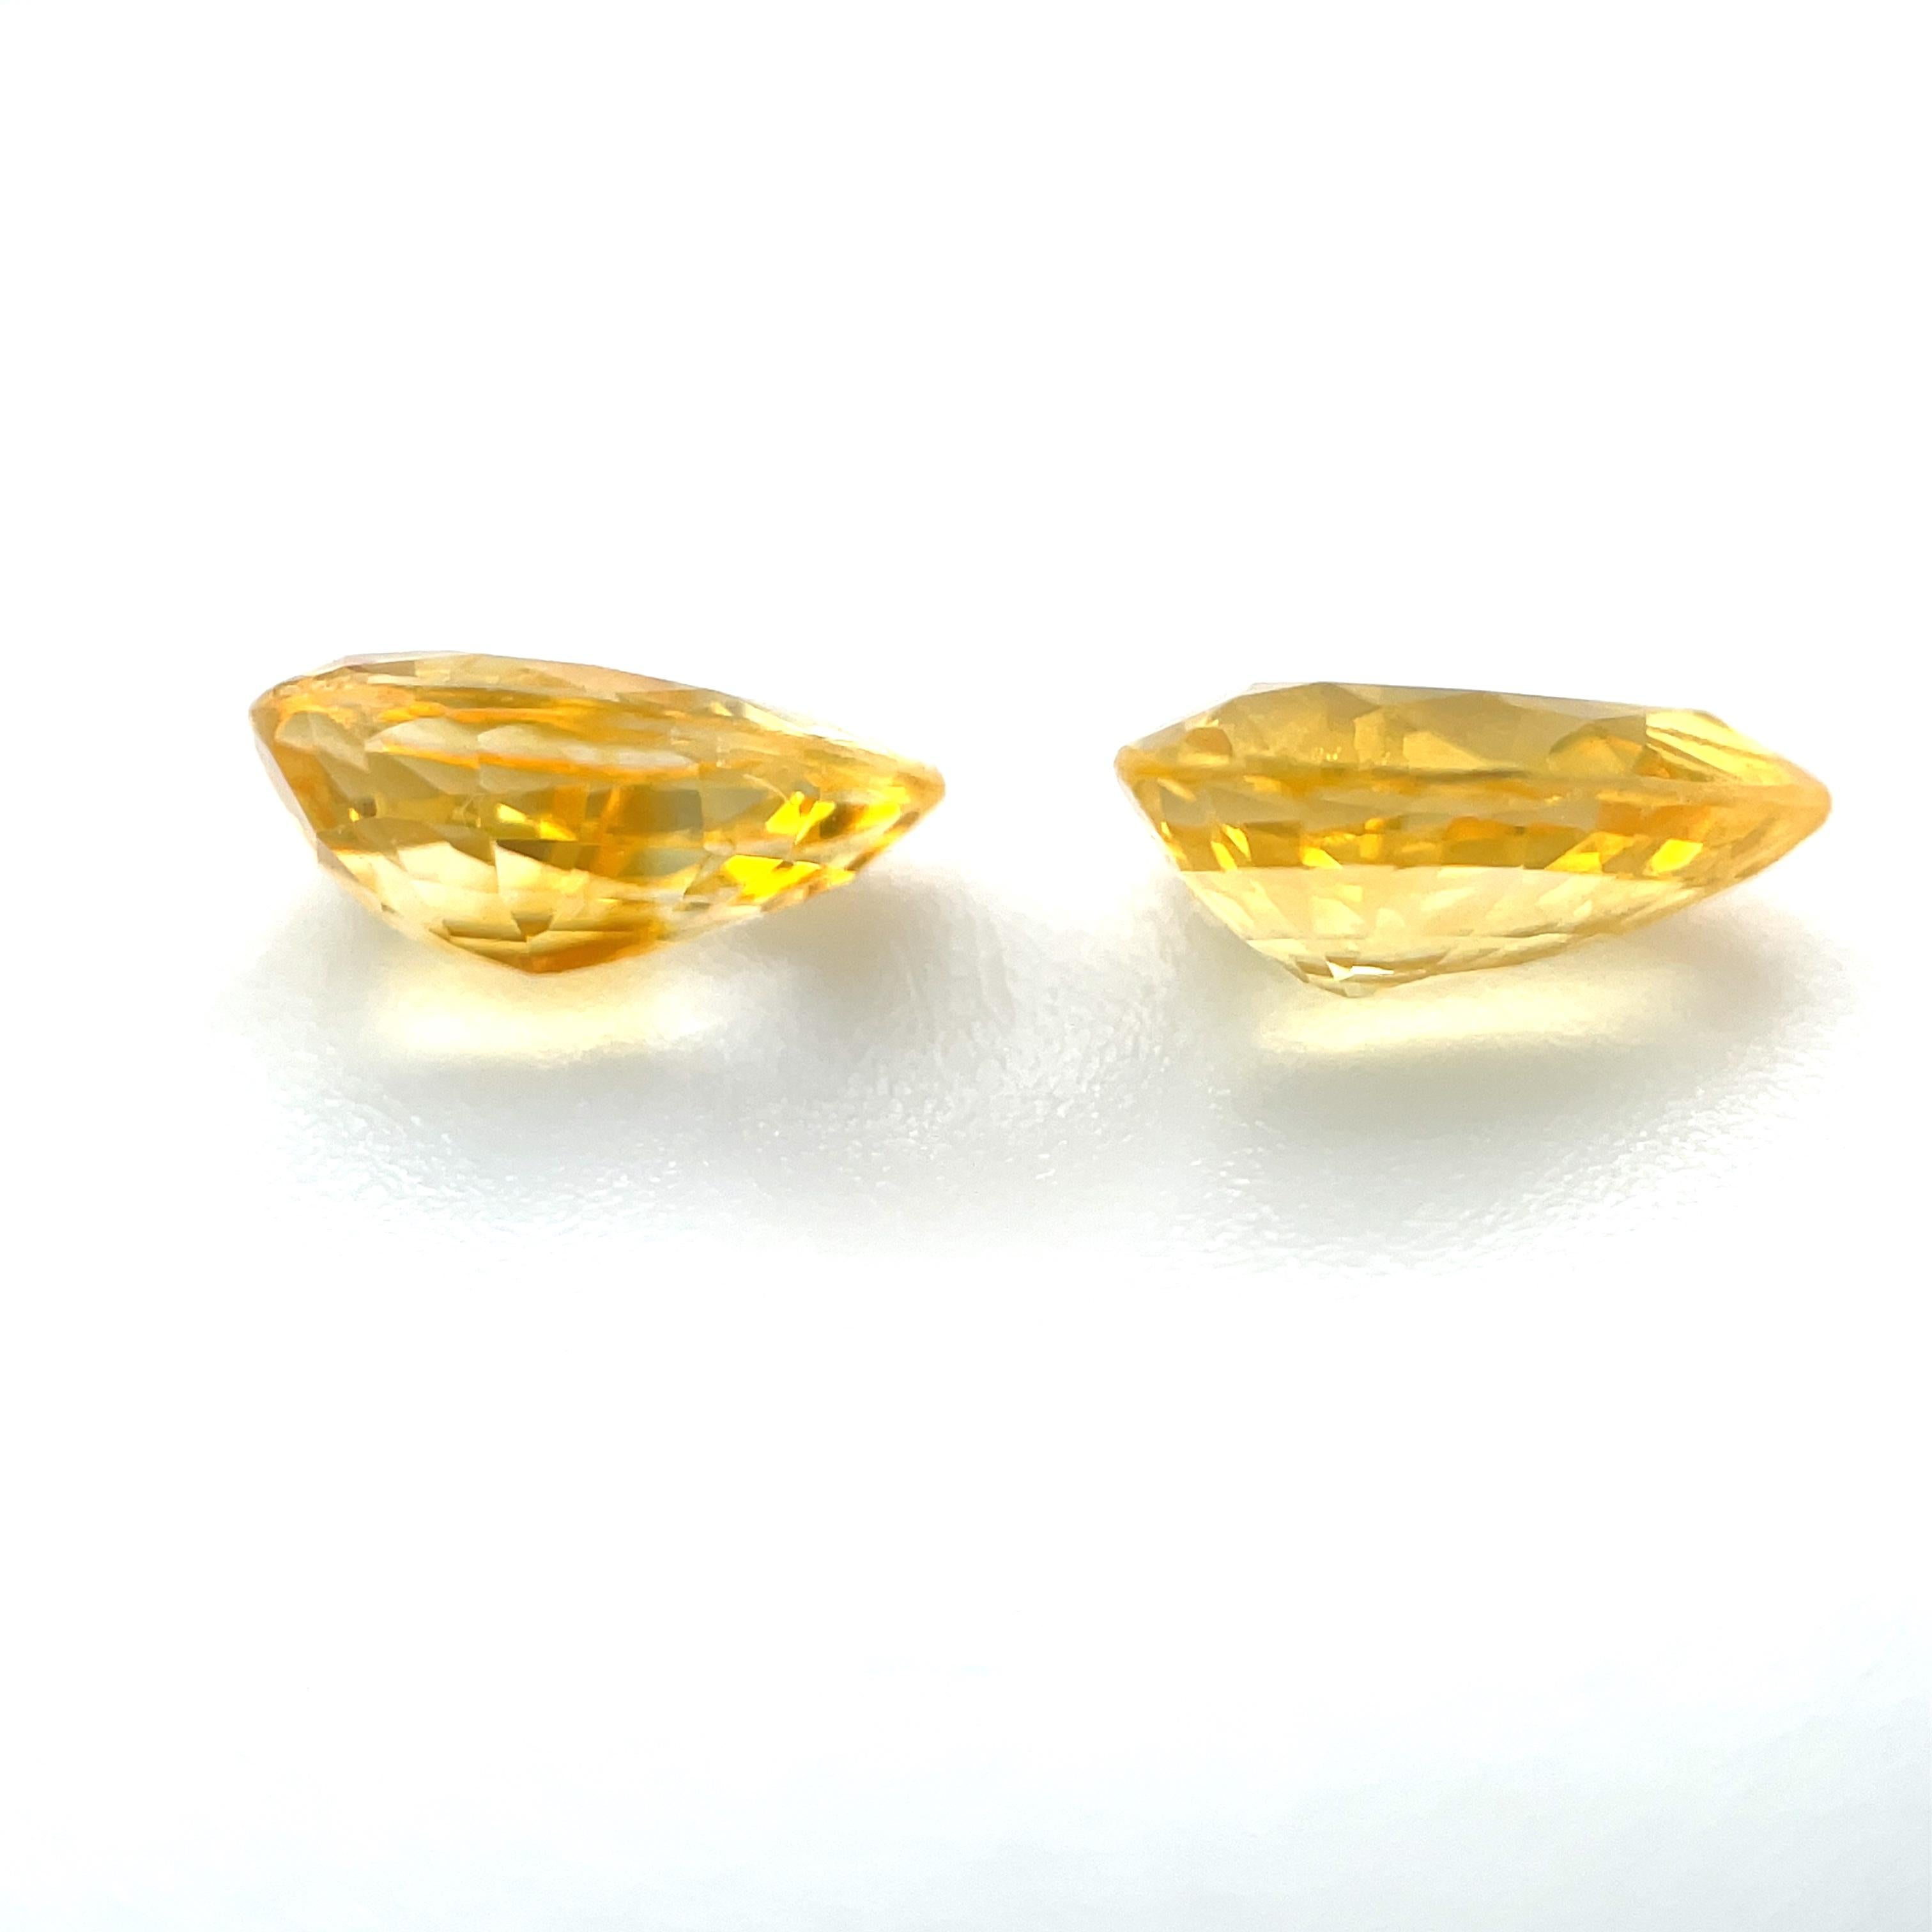 Artisan 1.70 Carat Total Pair of Pear Shaped Yellow Sapphires for Earrings, Loose Gems For Sale